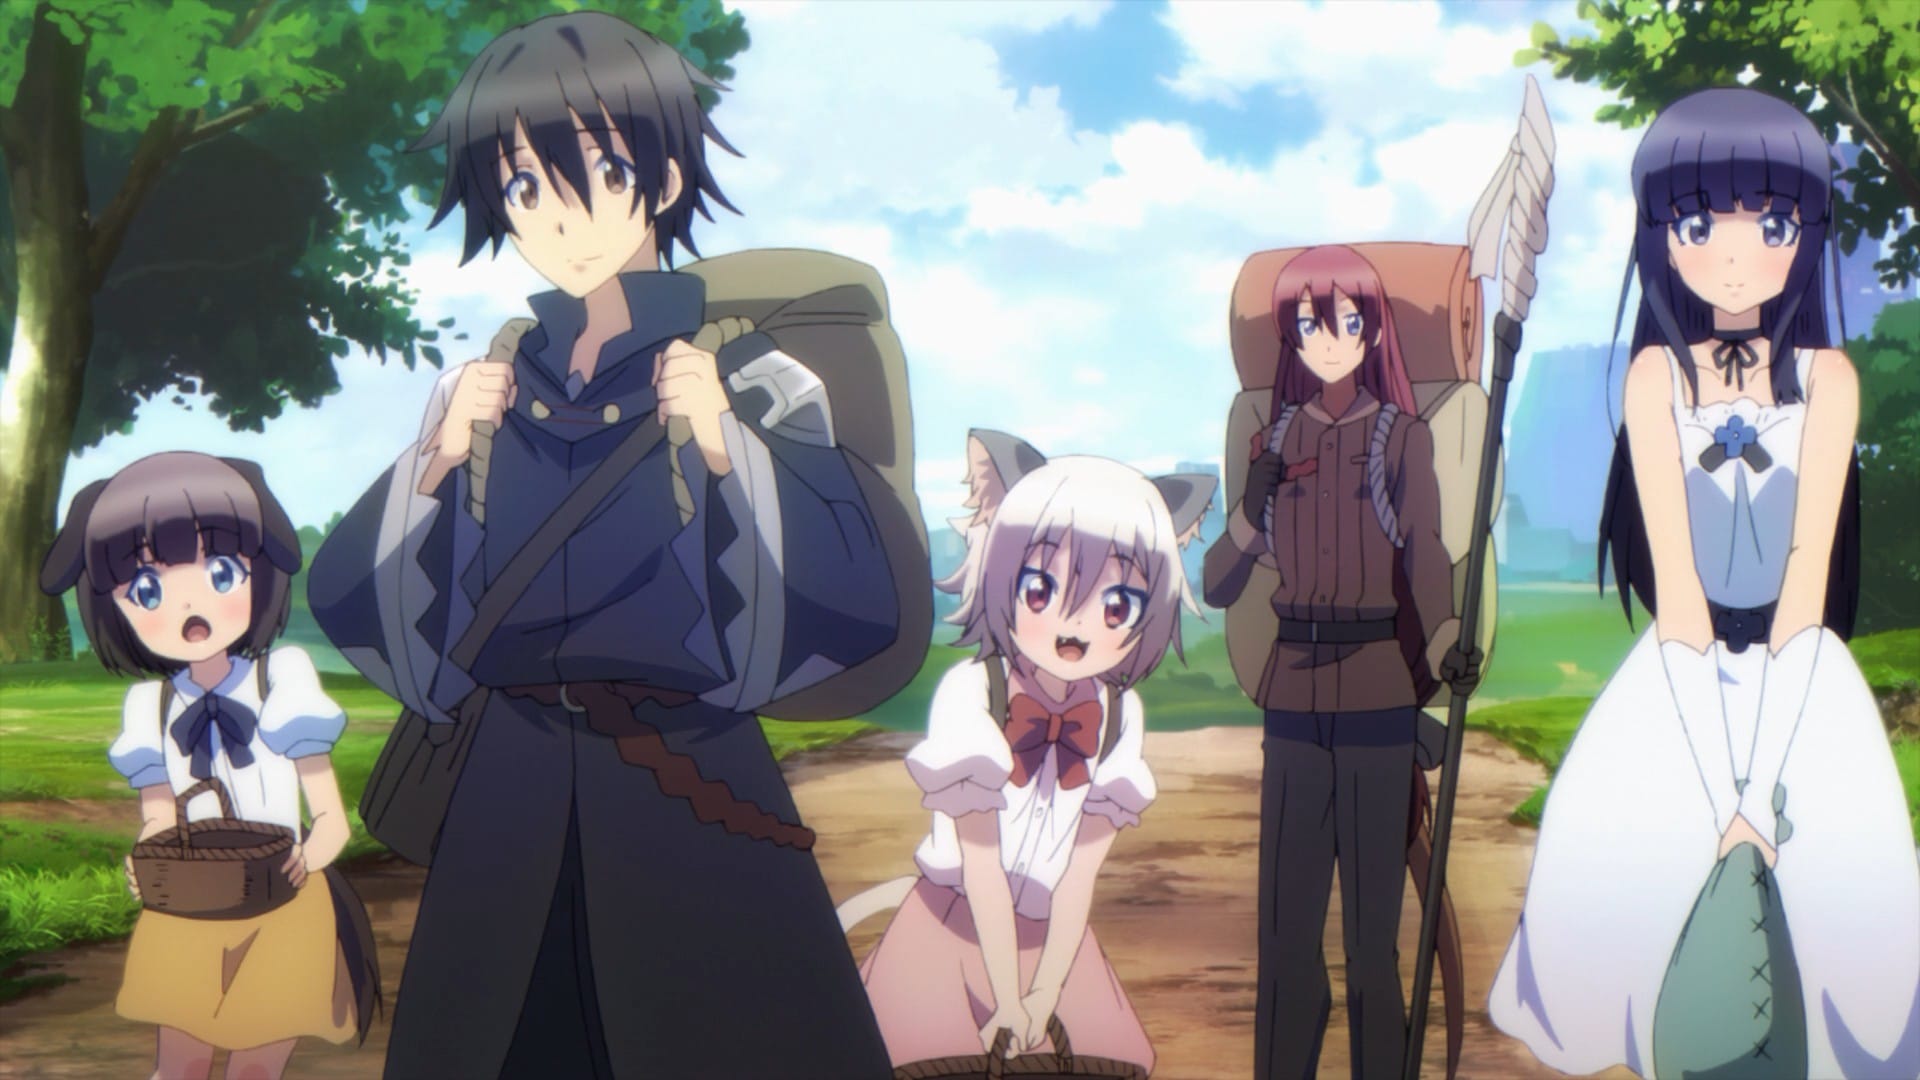 Anime Like Death March to the Parallel World Rhapsody